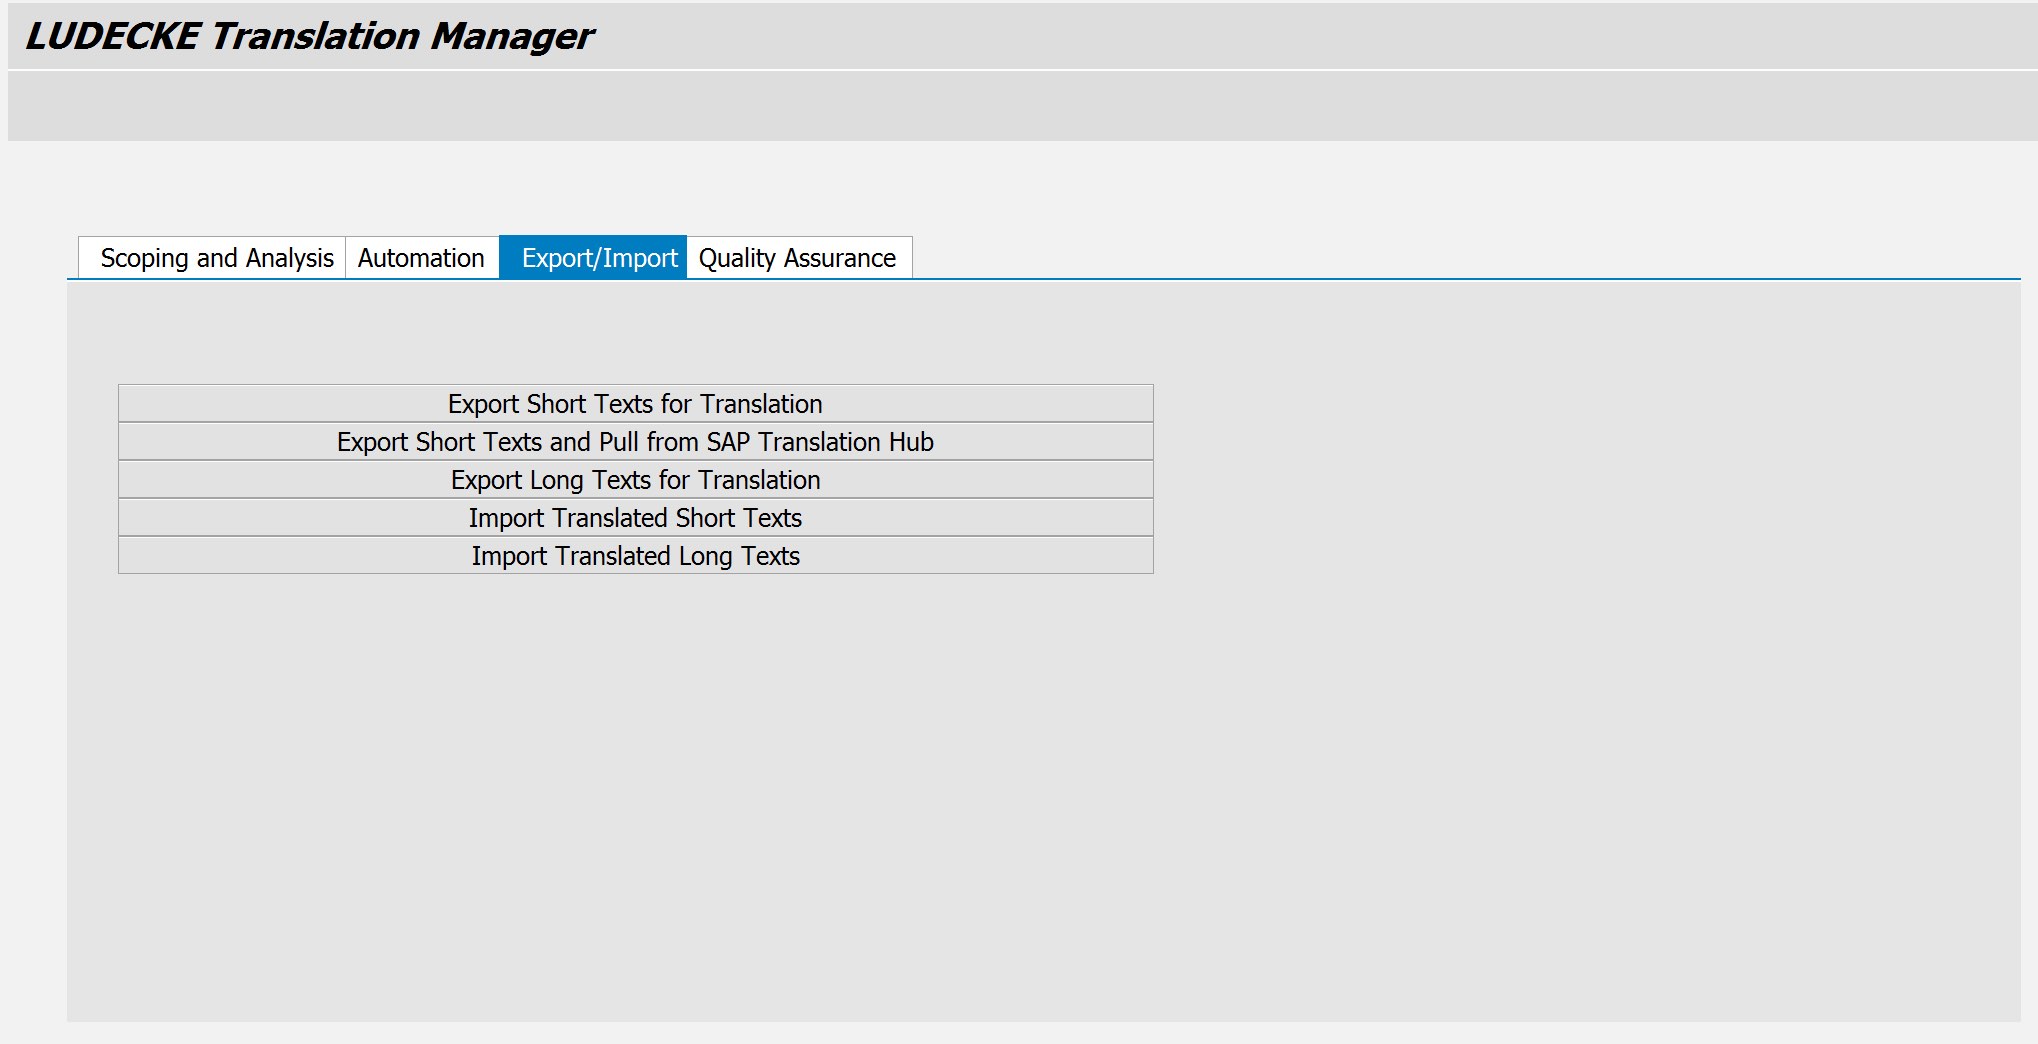 LUDECKE Translation Manager covers four main areas.